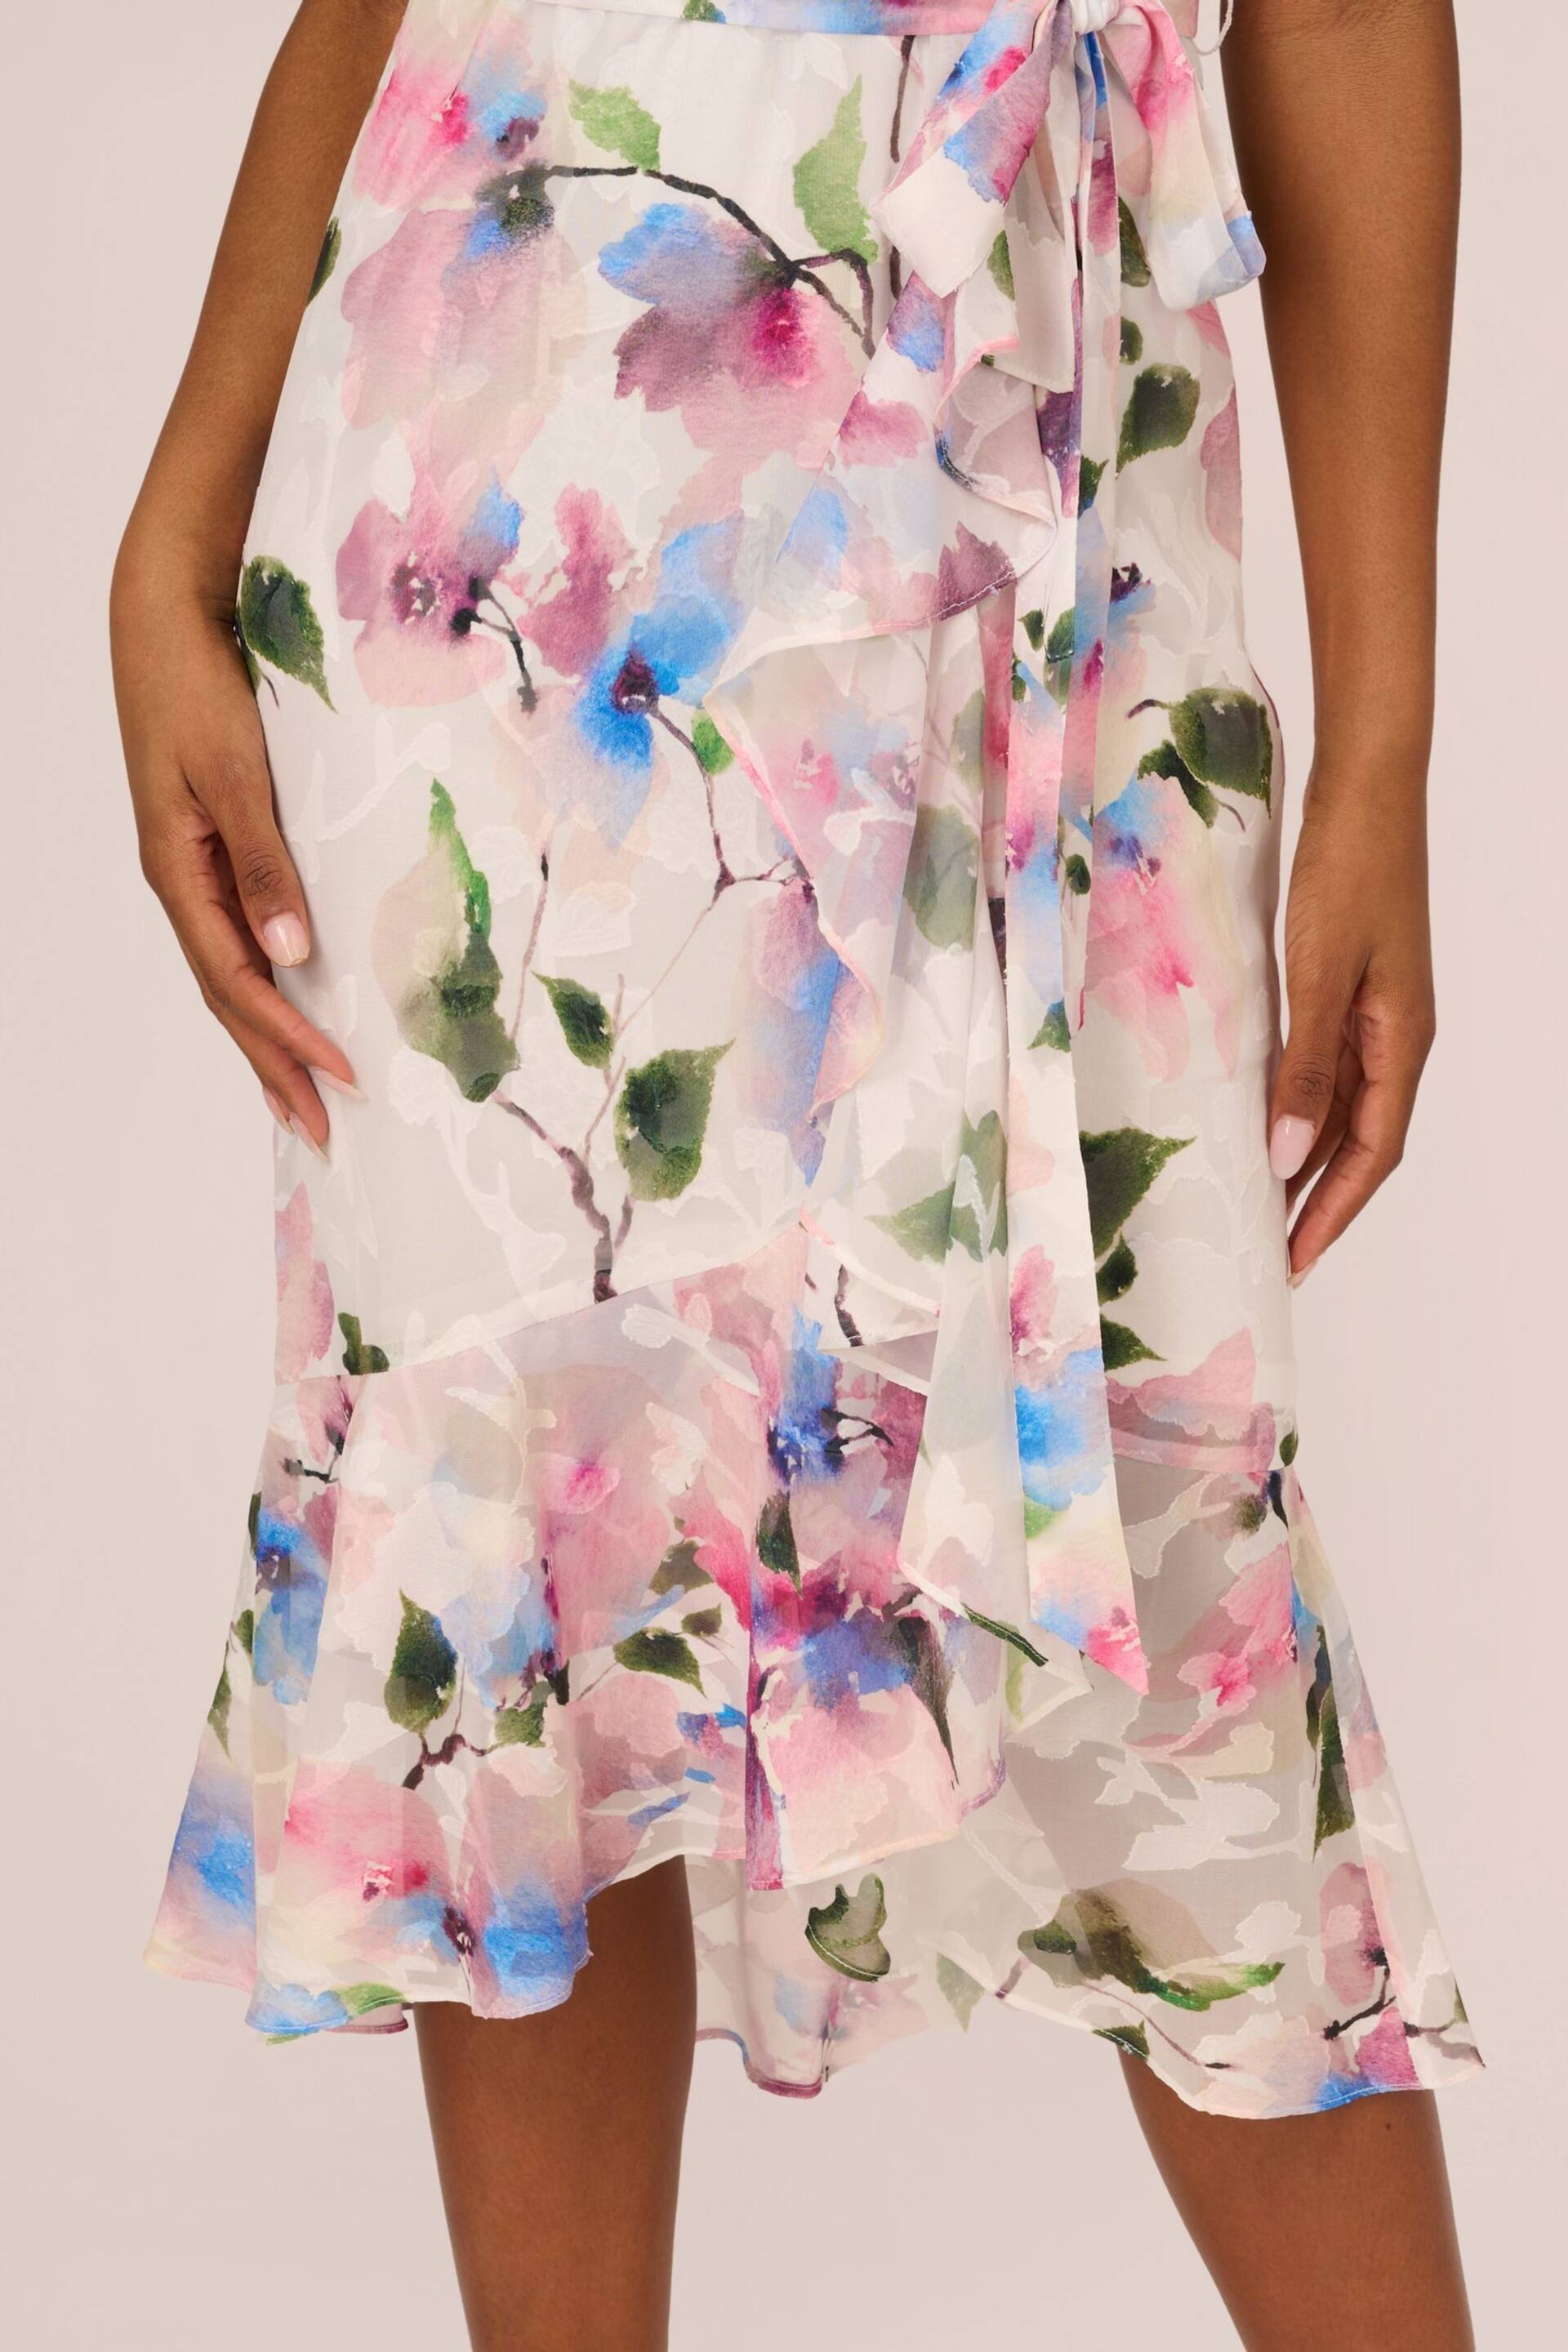 Adrianna Papell White Printed High-Low Dress - Image 5 of 7